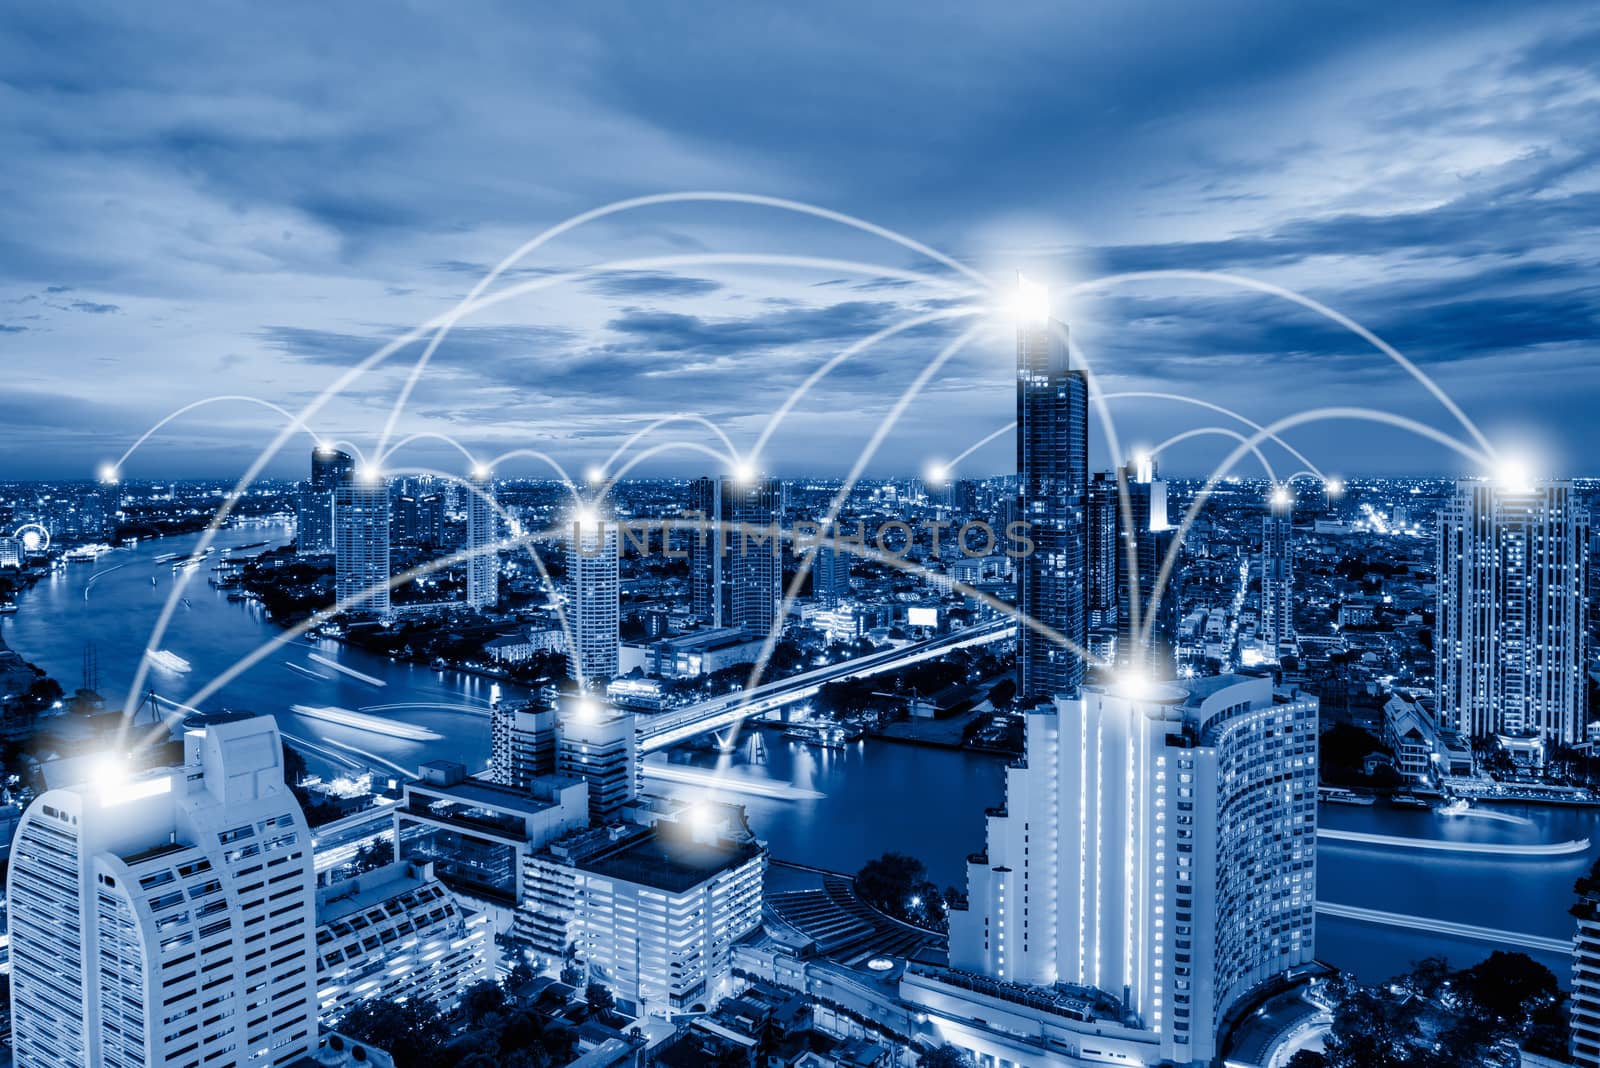 Technology Network Connect and Intelligence Smart City, Communication 5G Networking for Global Business Futuristic. Digital Big Data Connection Via Technology Telecommunication 5G, Community Connect. by MahaHeang245789